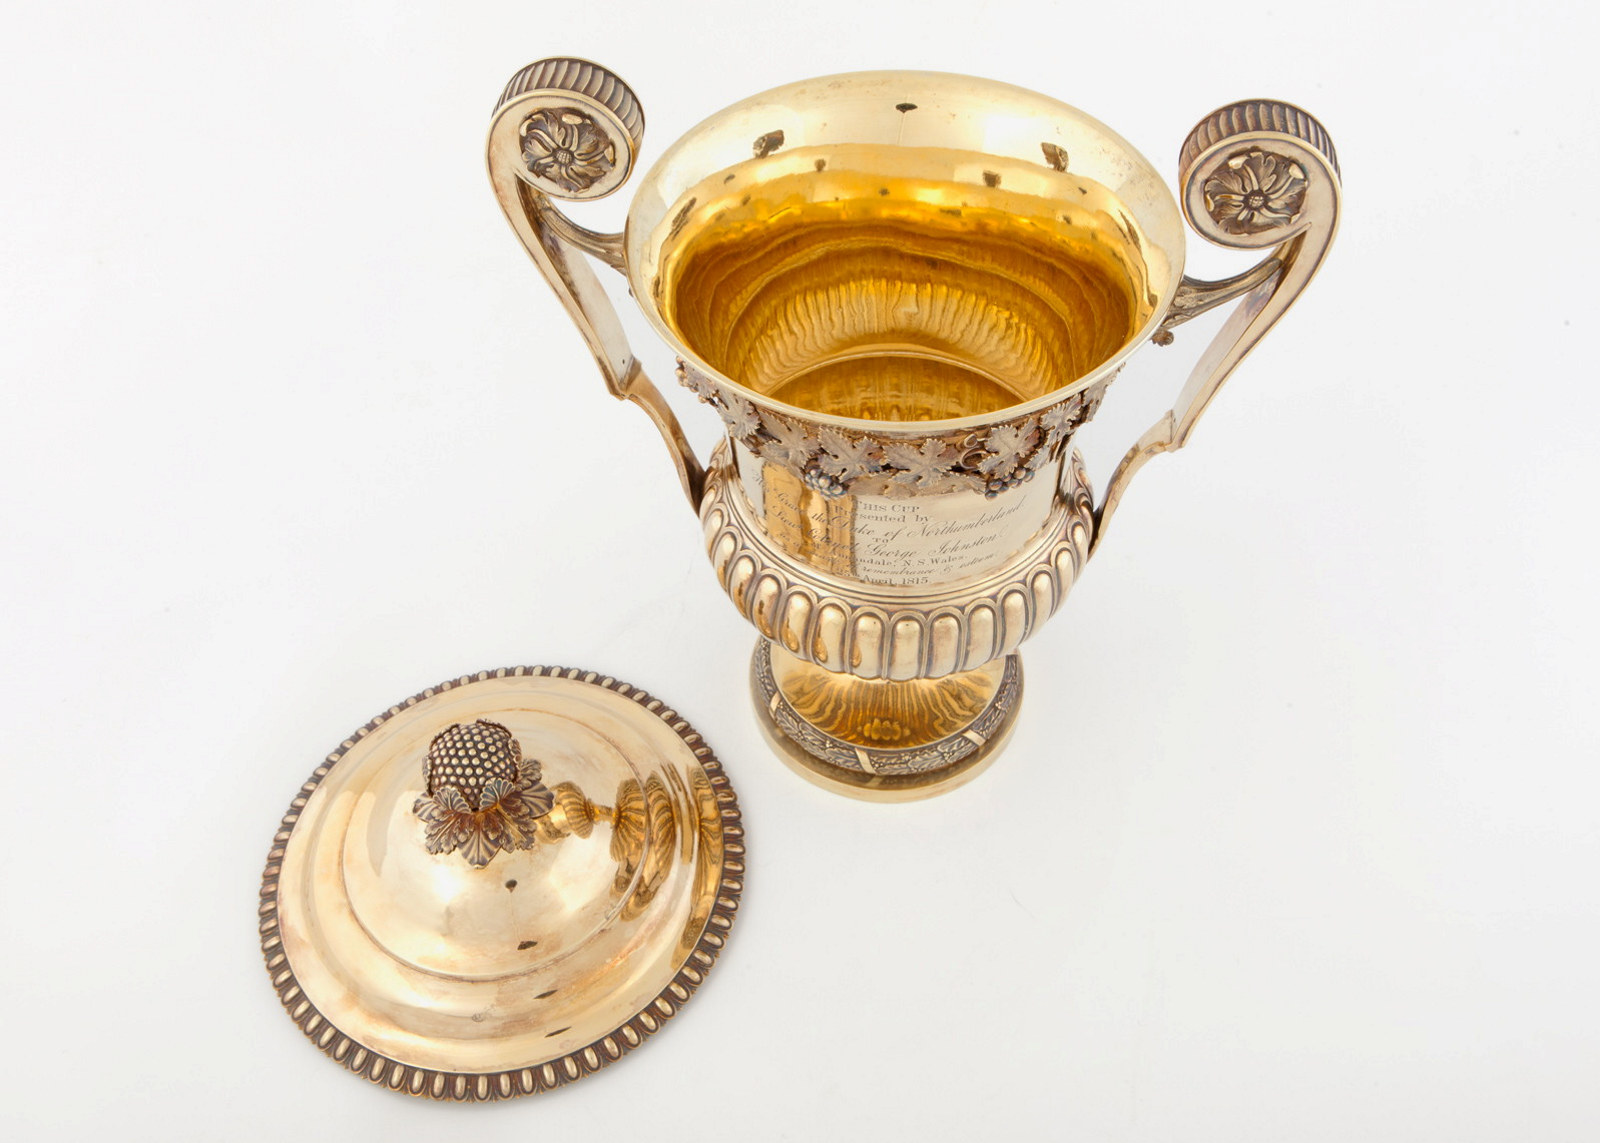 Urn shaped silver gilt cup presented to Lieutenant Colonel George Johnston, 1814